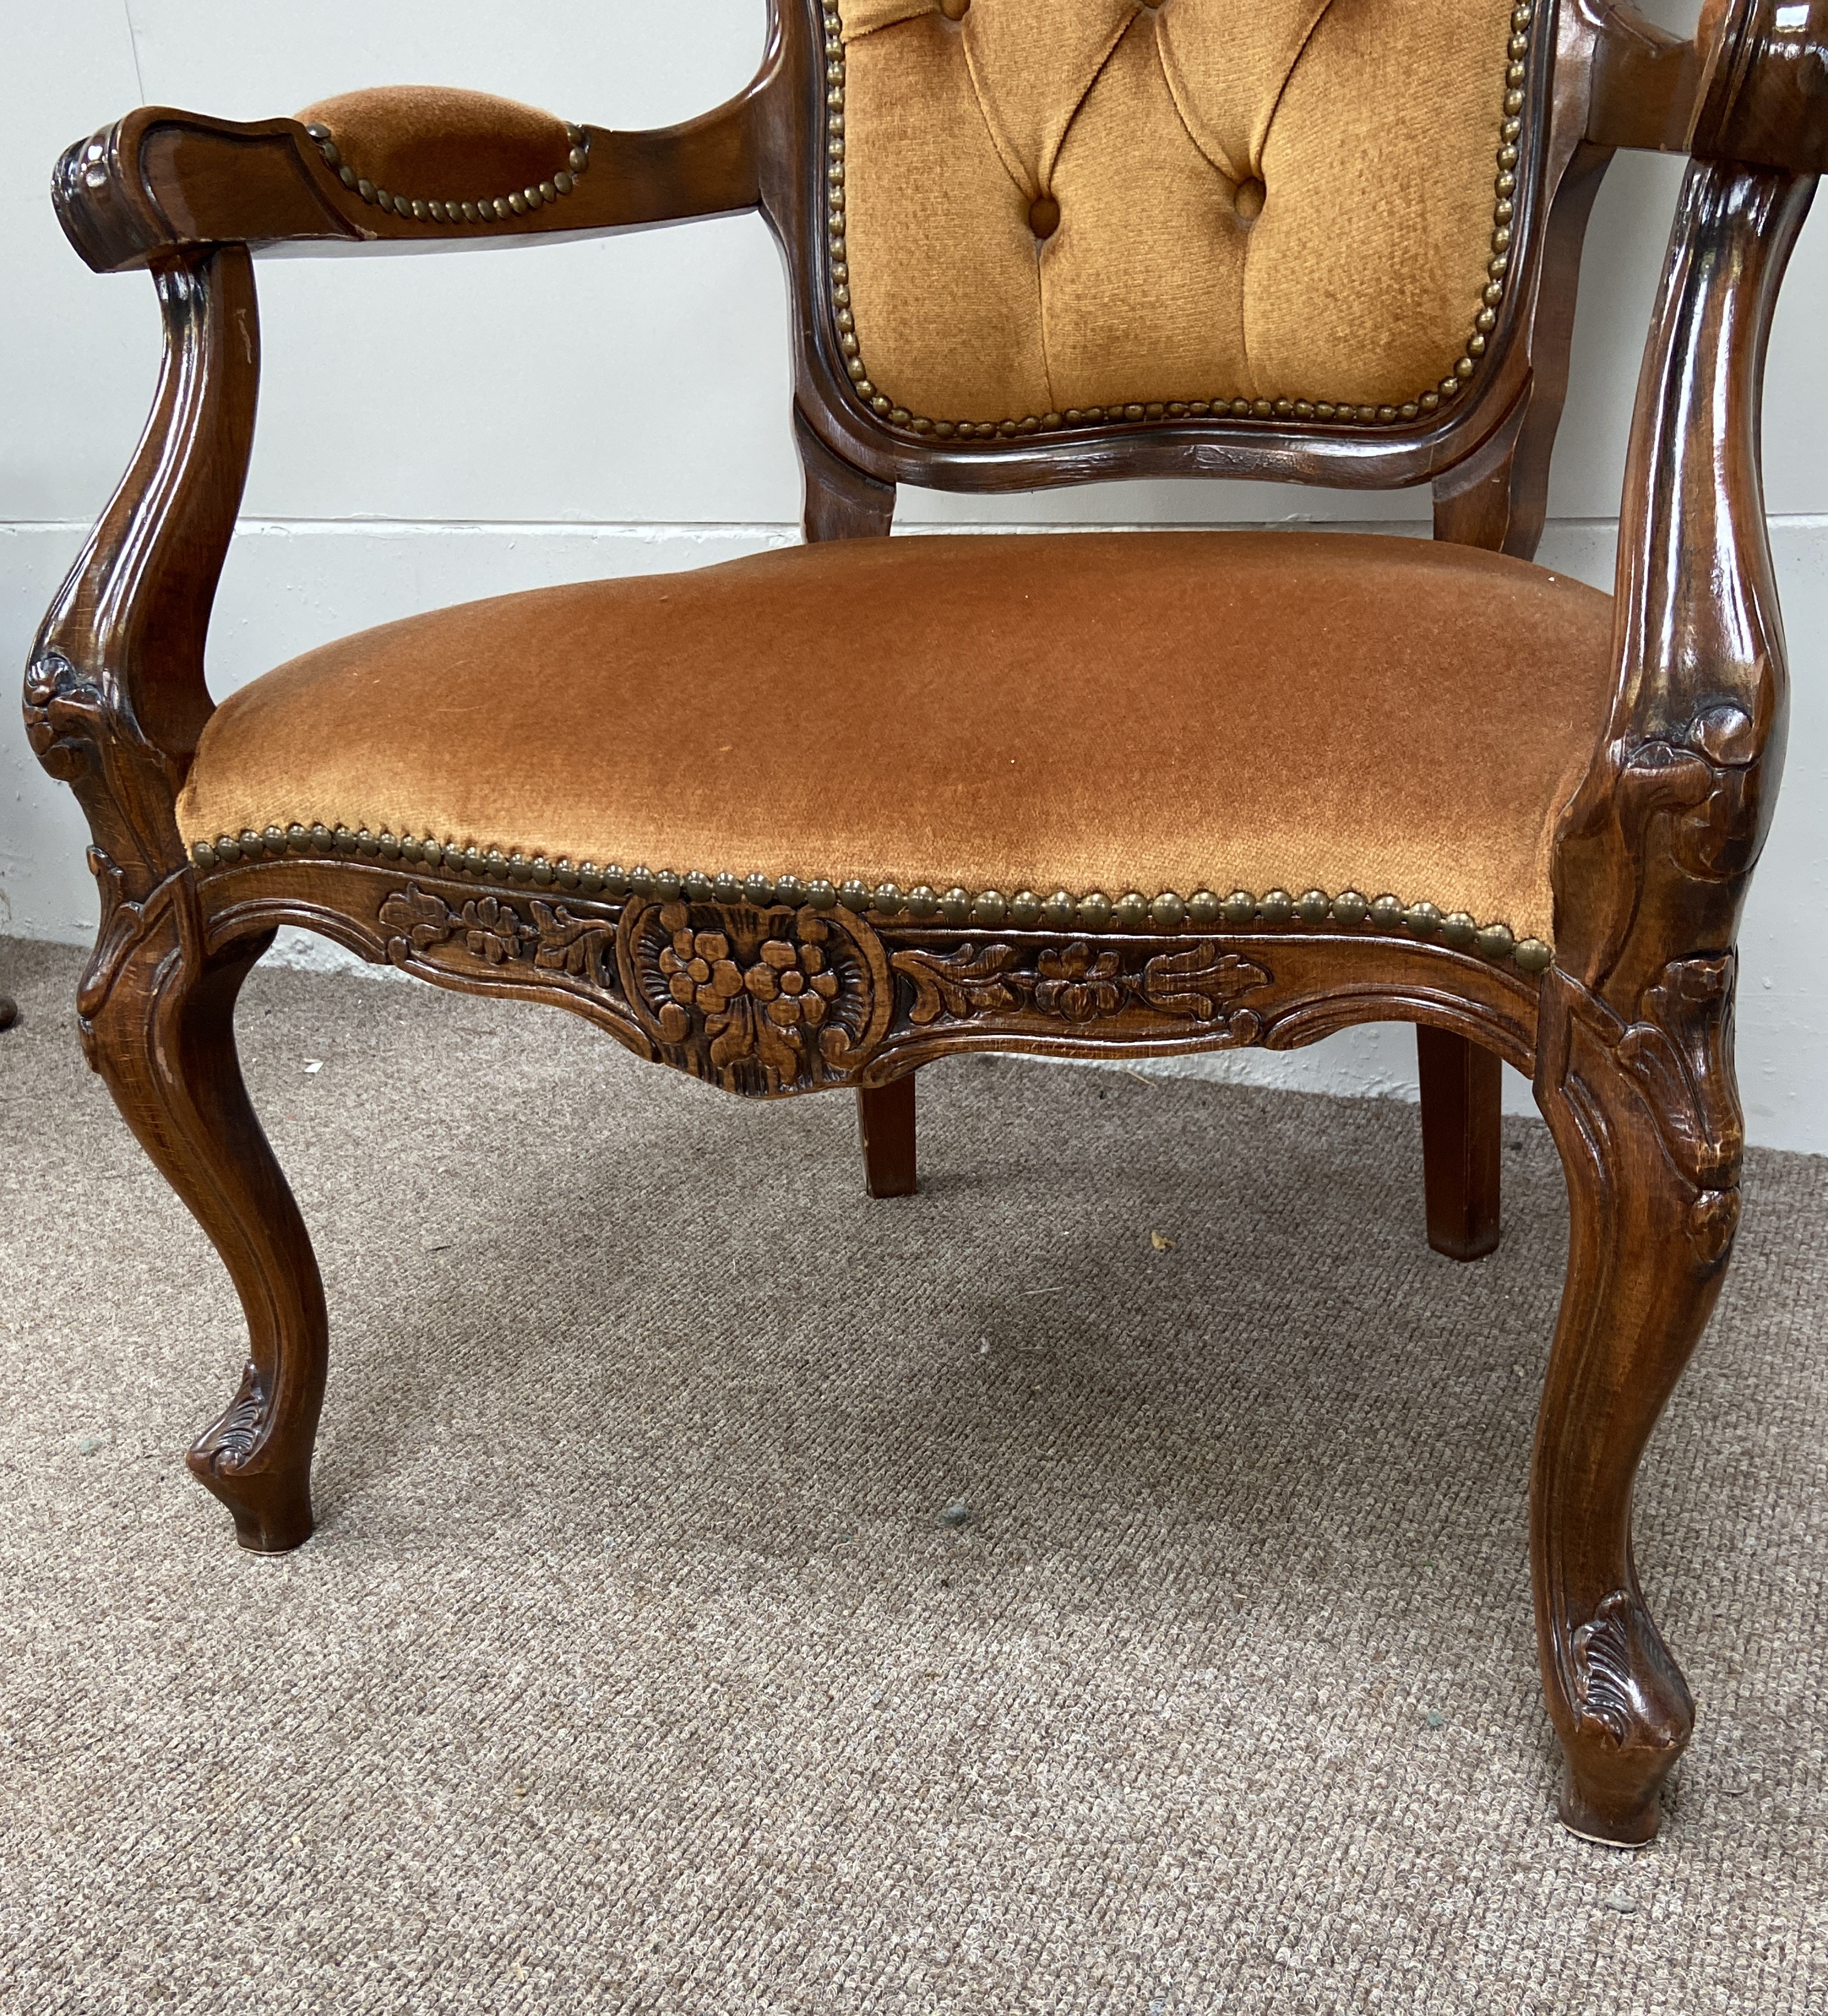 A Victorian style button upholstered easy chair, with padded arms and cabriole legs; also a piano - Image 3 of 5